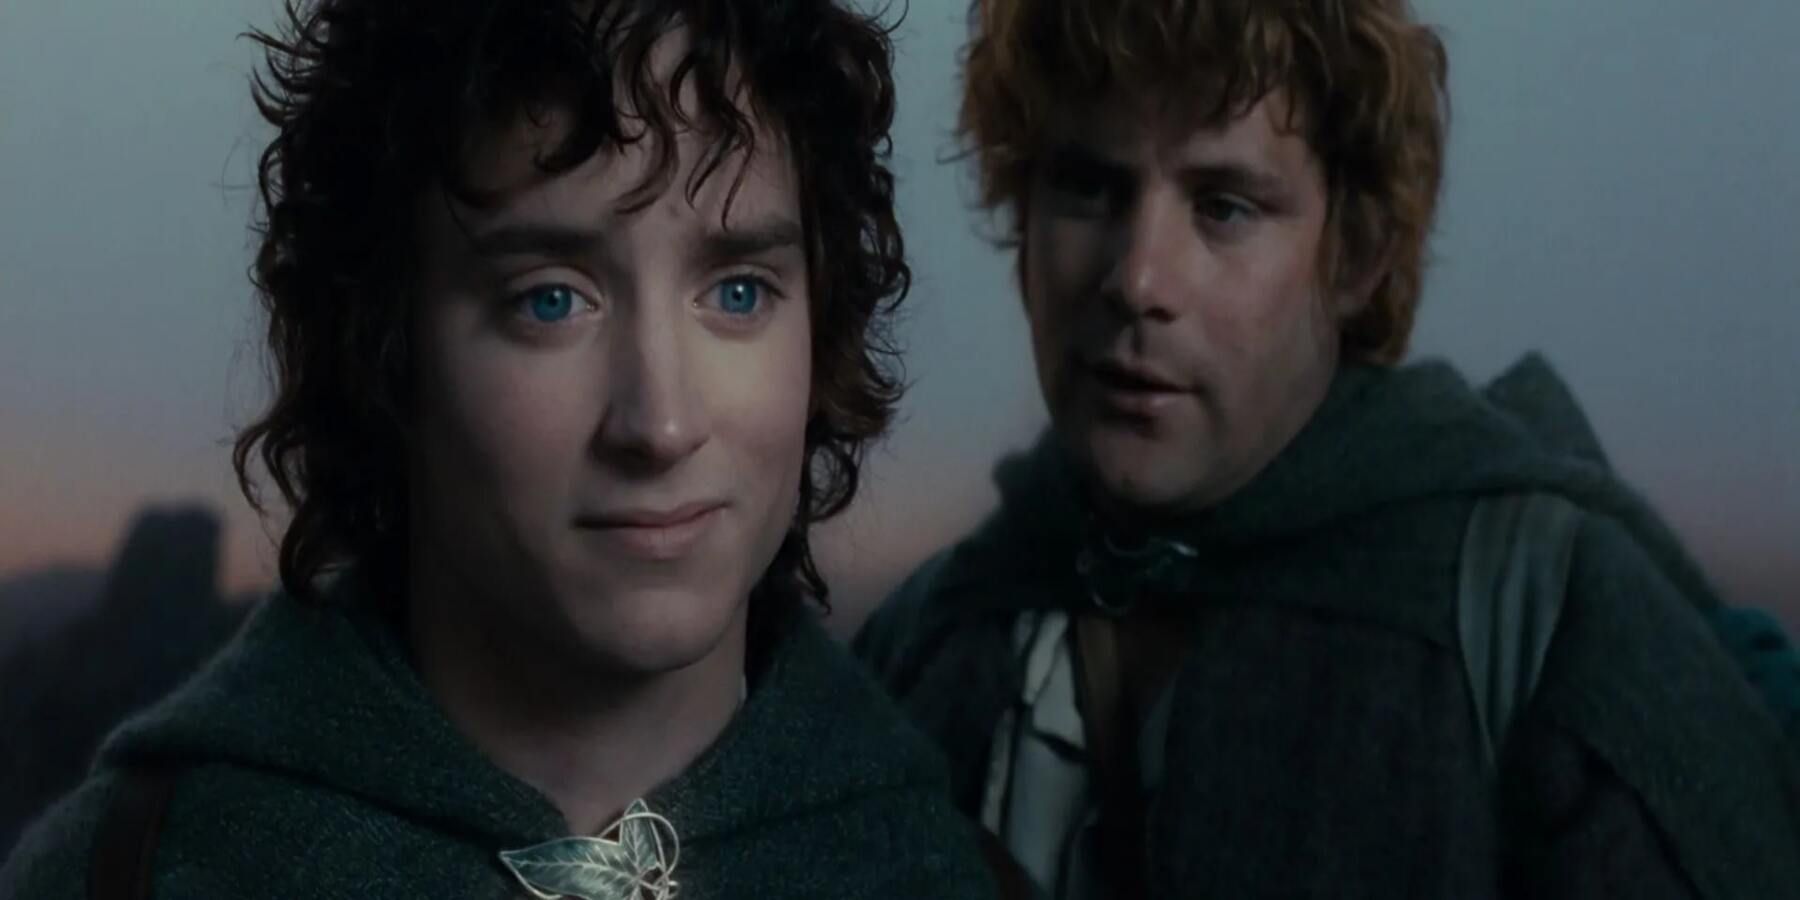 LOTR: Would Sam Have Fought Frodo To Destroy The One Ring?